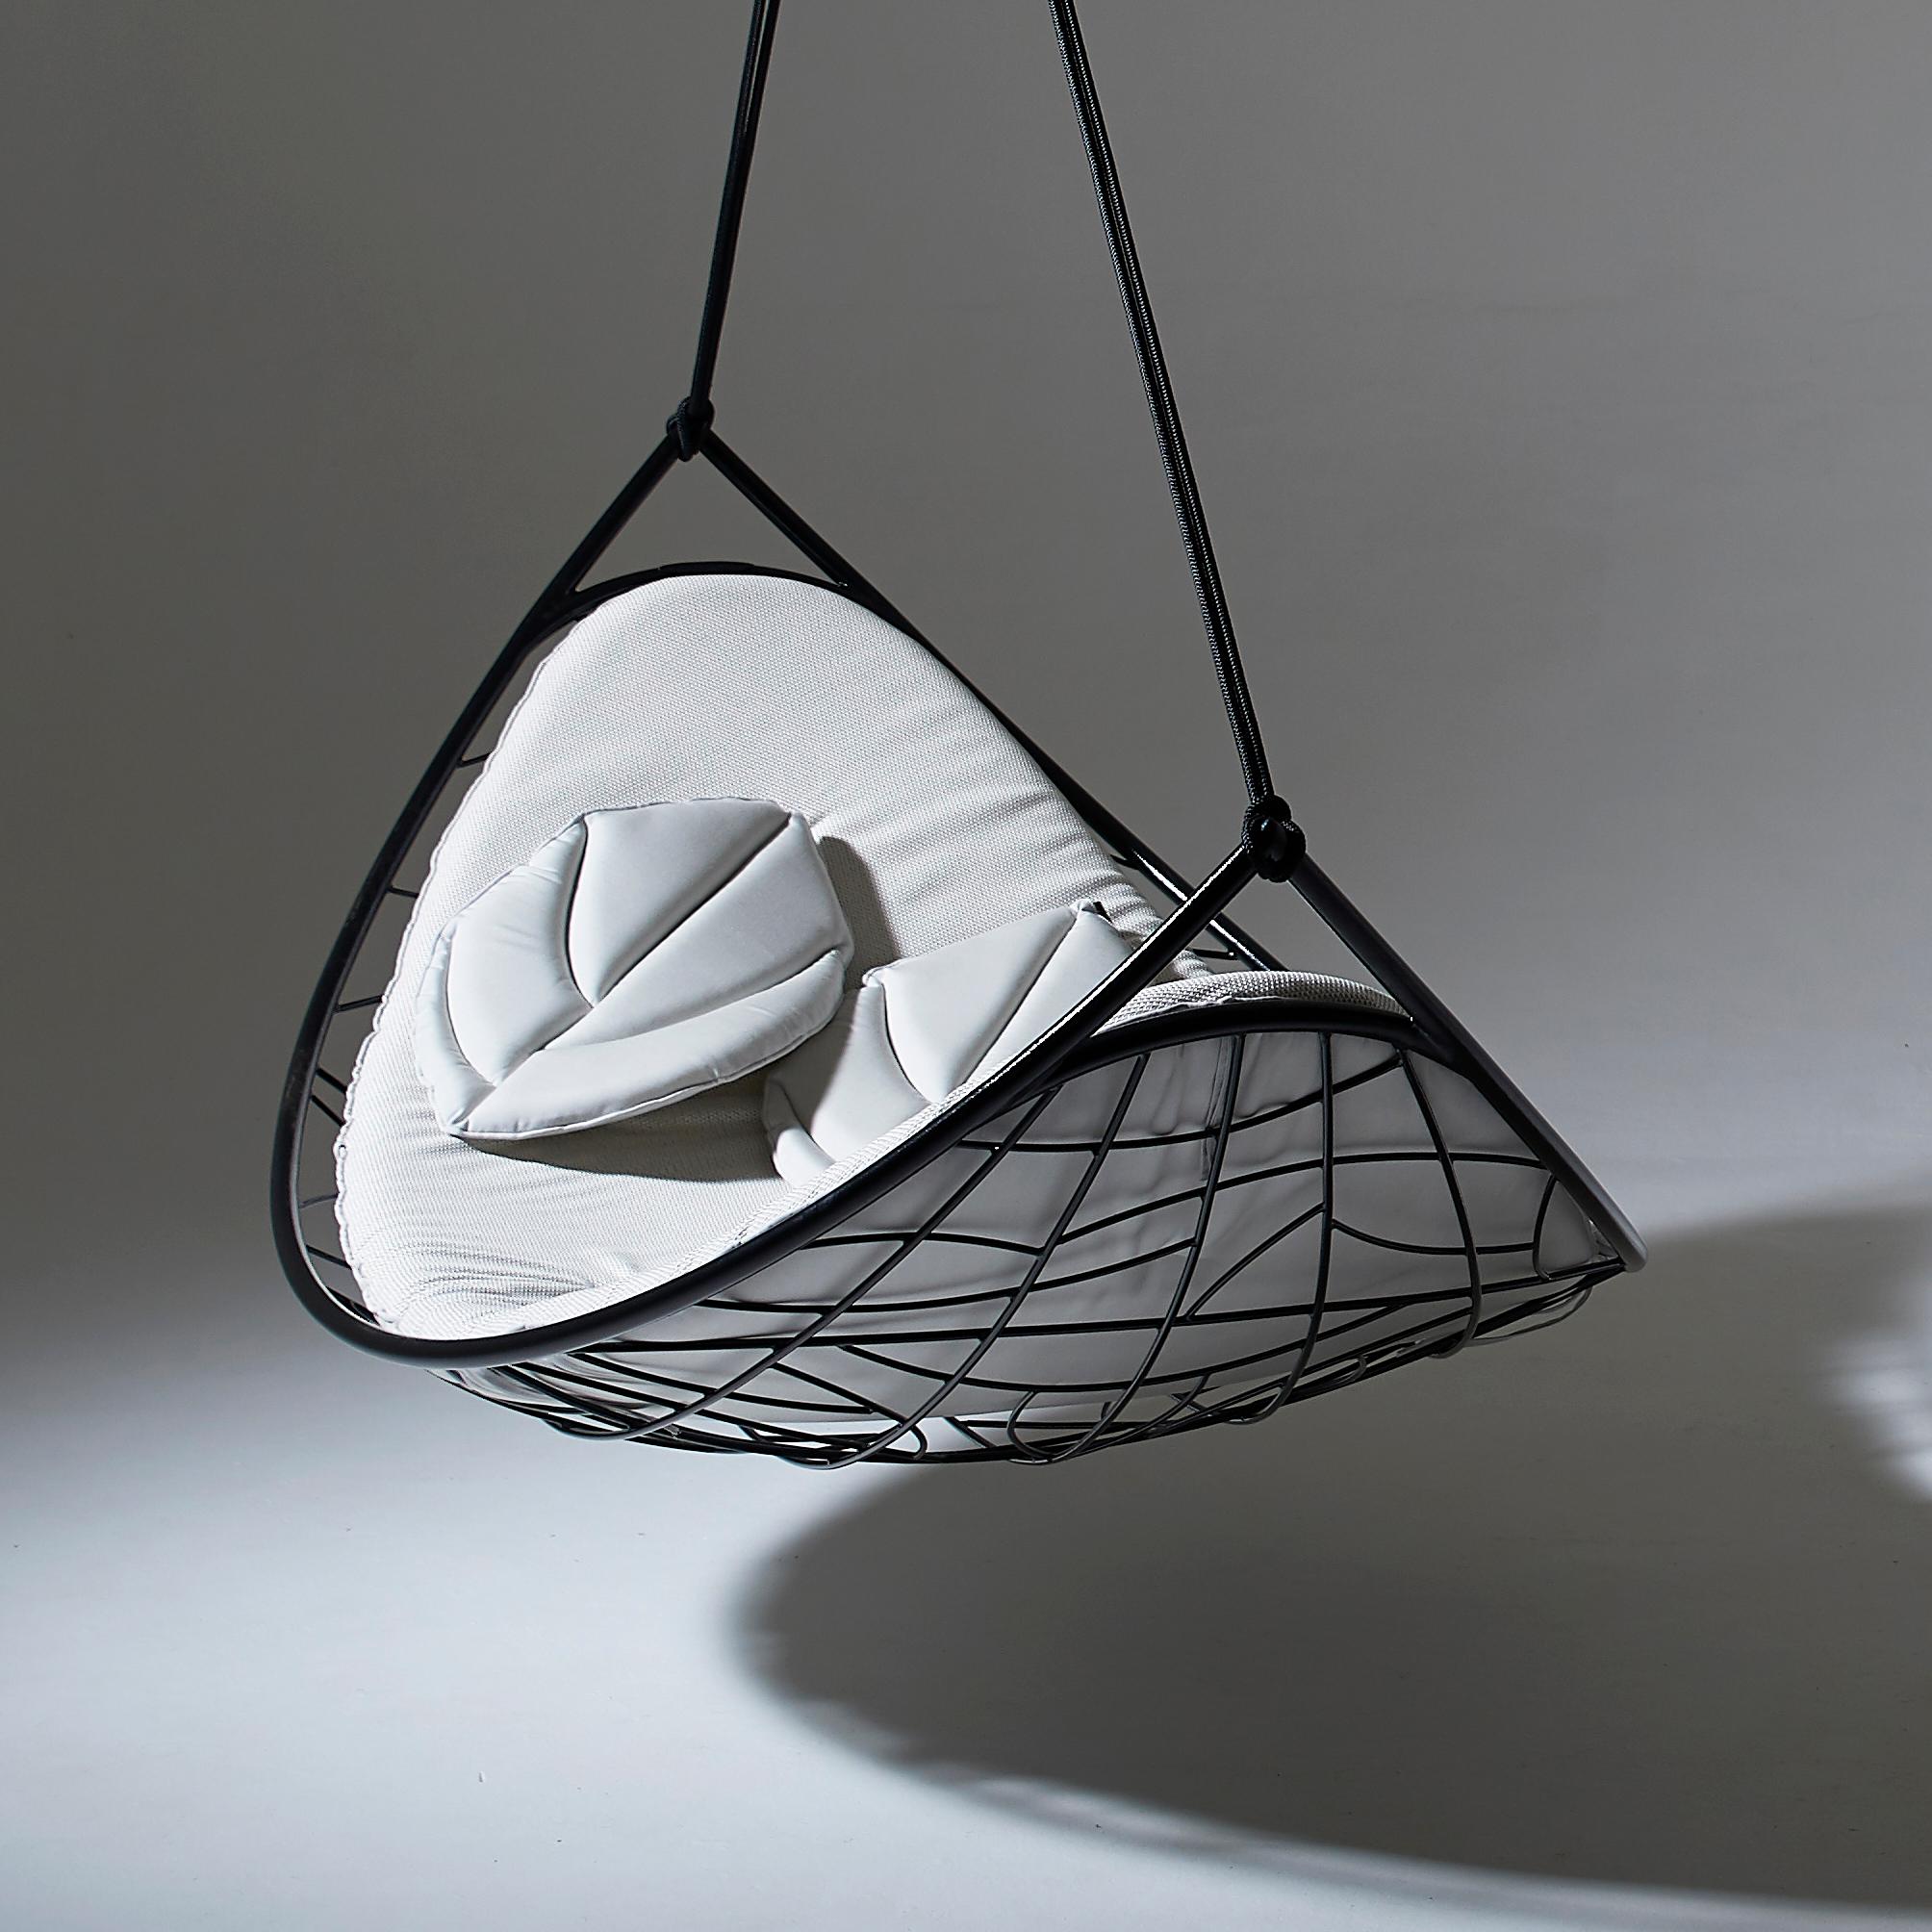 The Melon hanging lounger's organic shape is reminiscent of a slice of fruit like a melon.

It is inspired by a hammock – but with its structured hard frame it will not fold in and is thus hugely comfortable. It is comfortable with ample room to